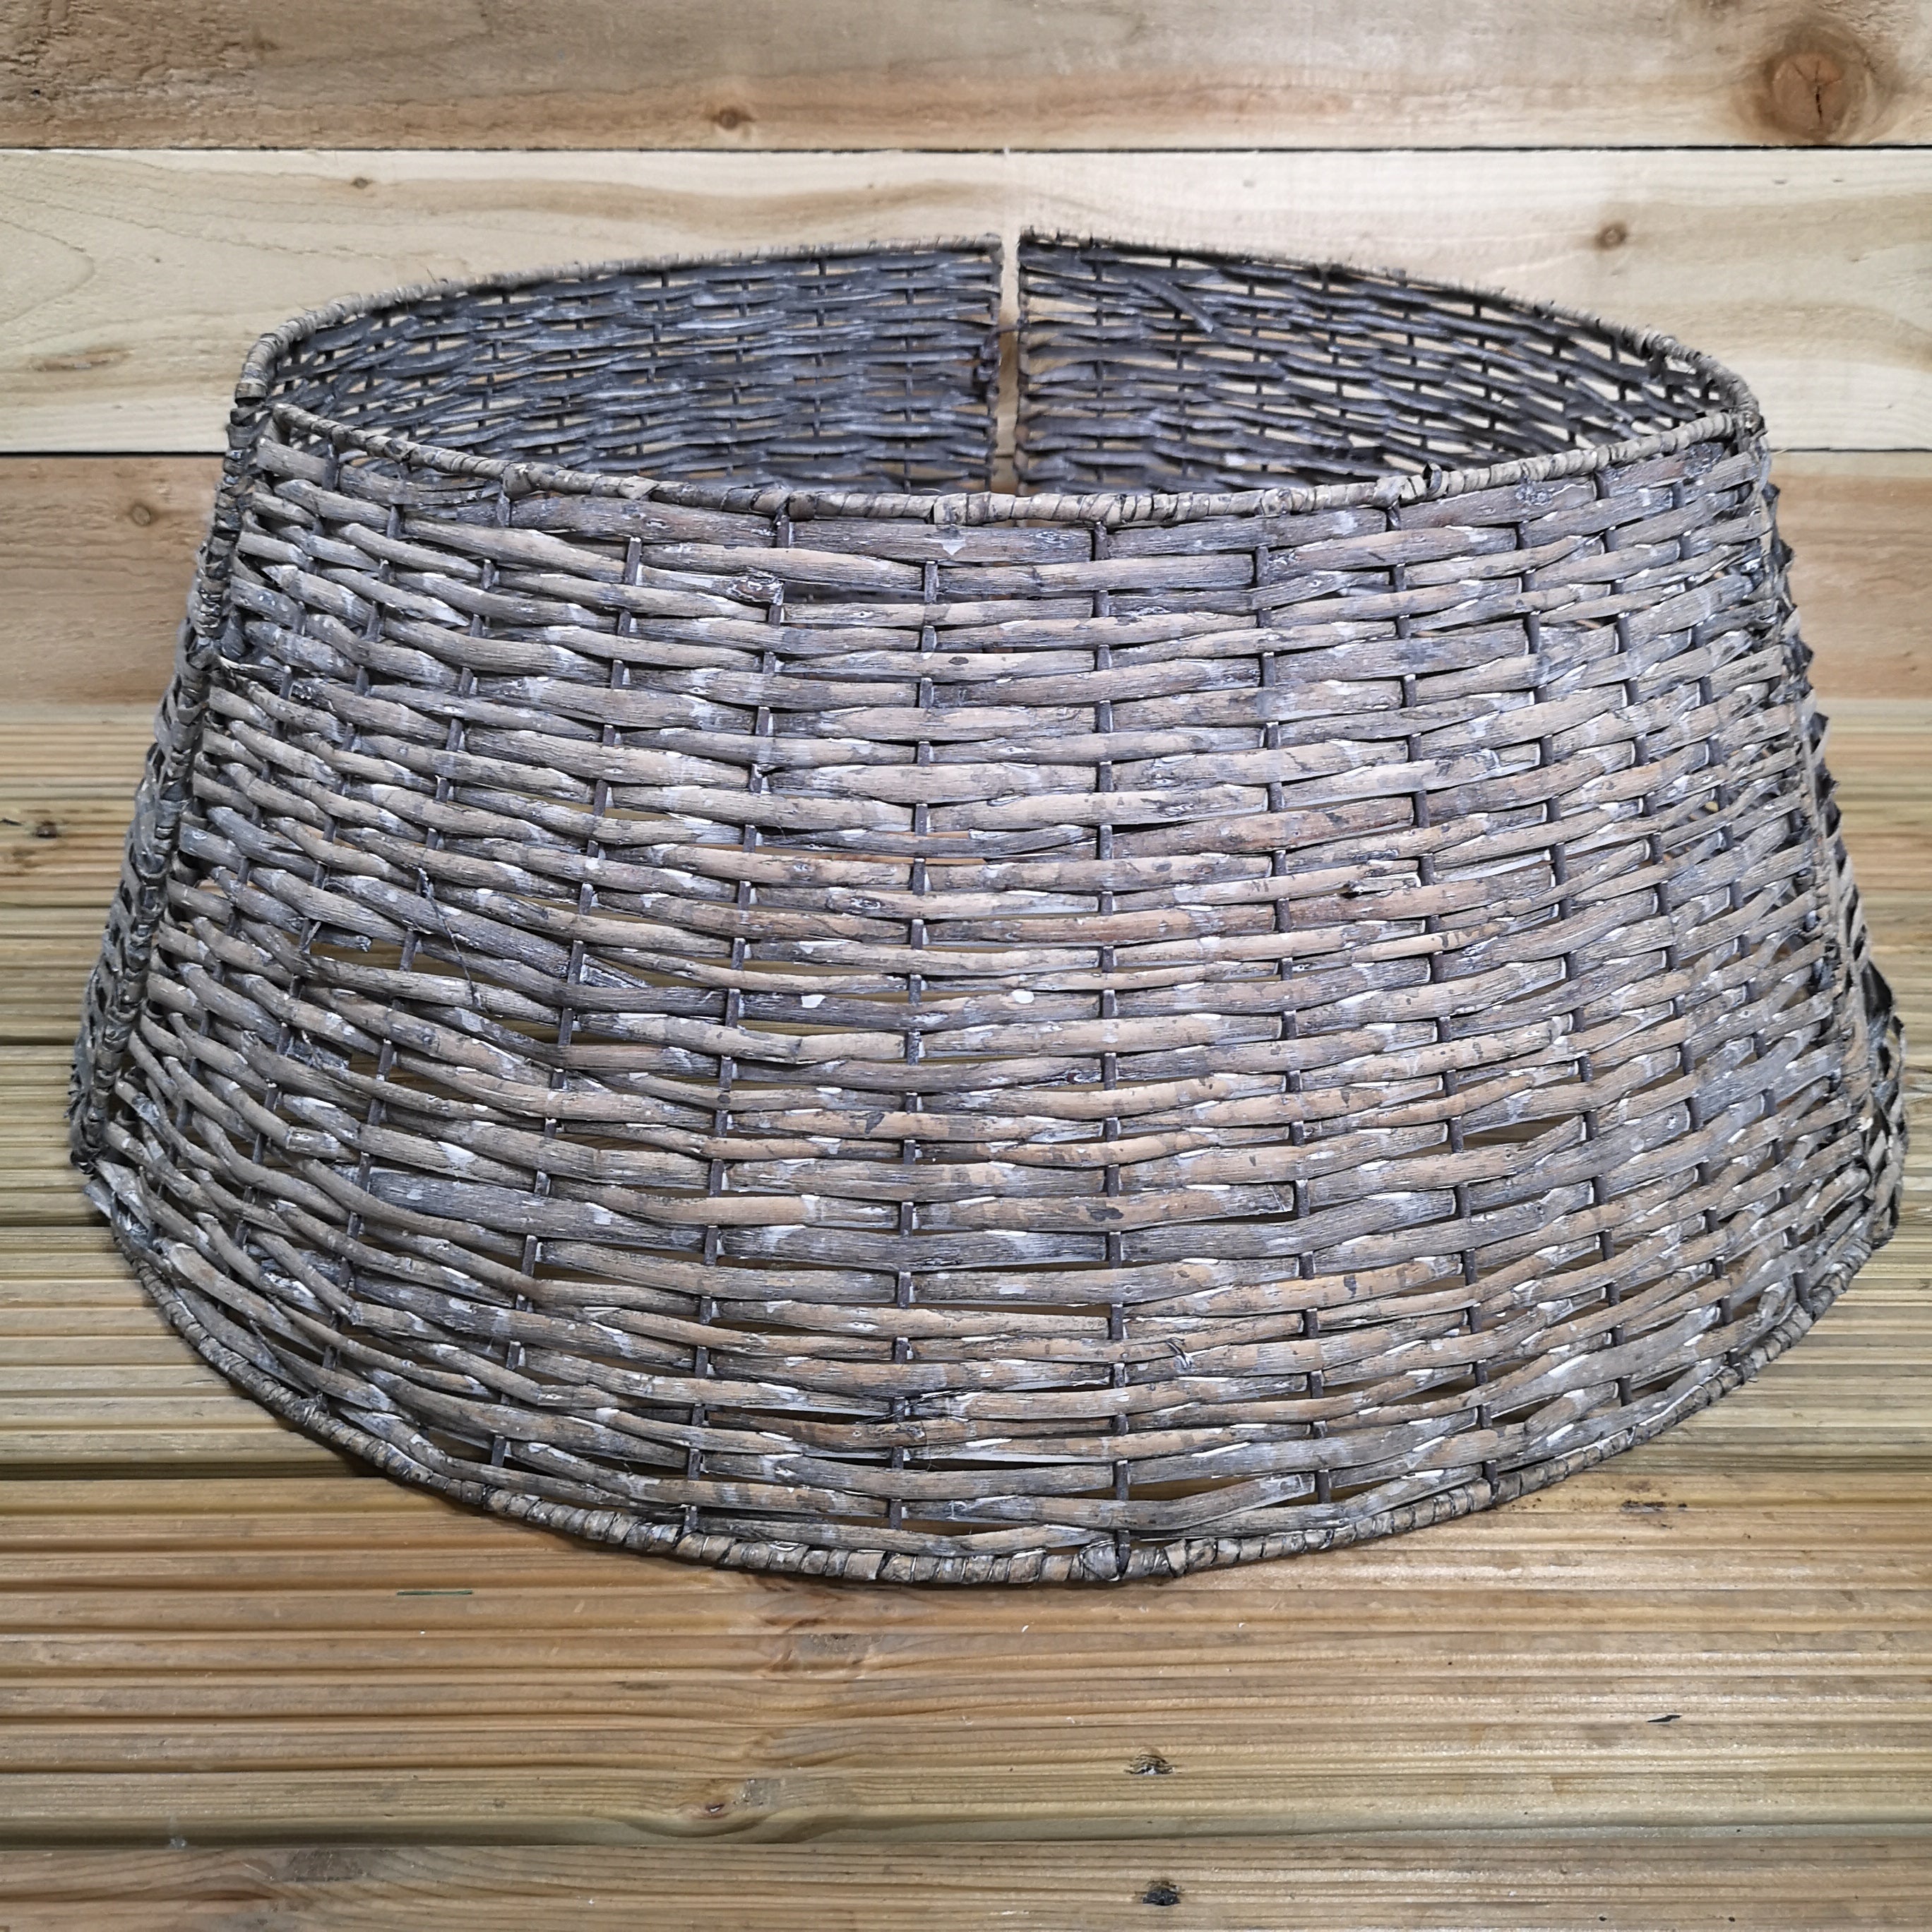 28/70cm Everlands KD Willow Christmas Tree Skirt Wicker Rattan - Large Grey Wash